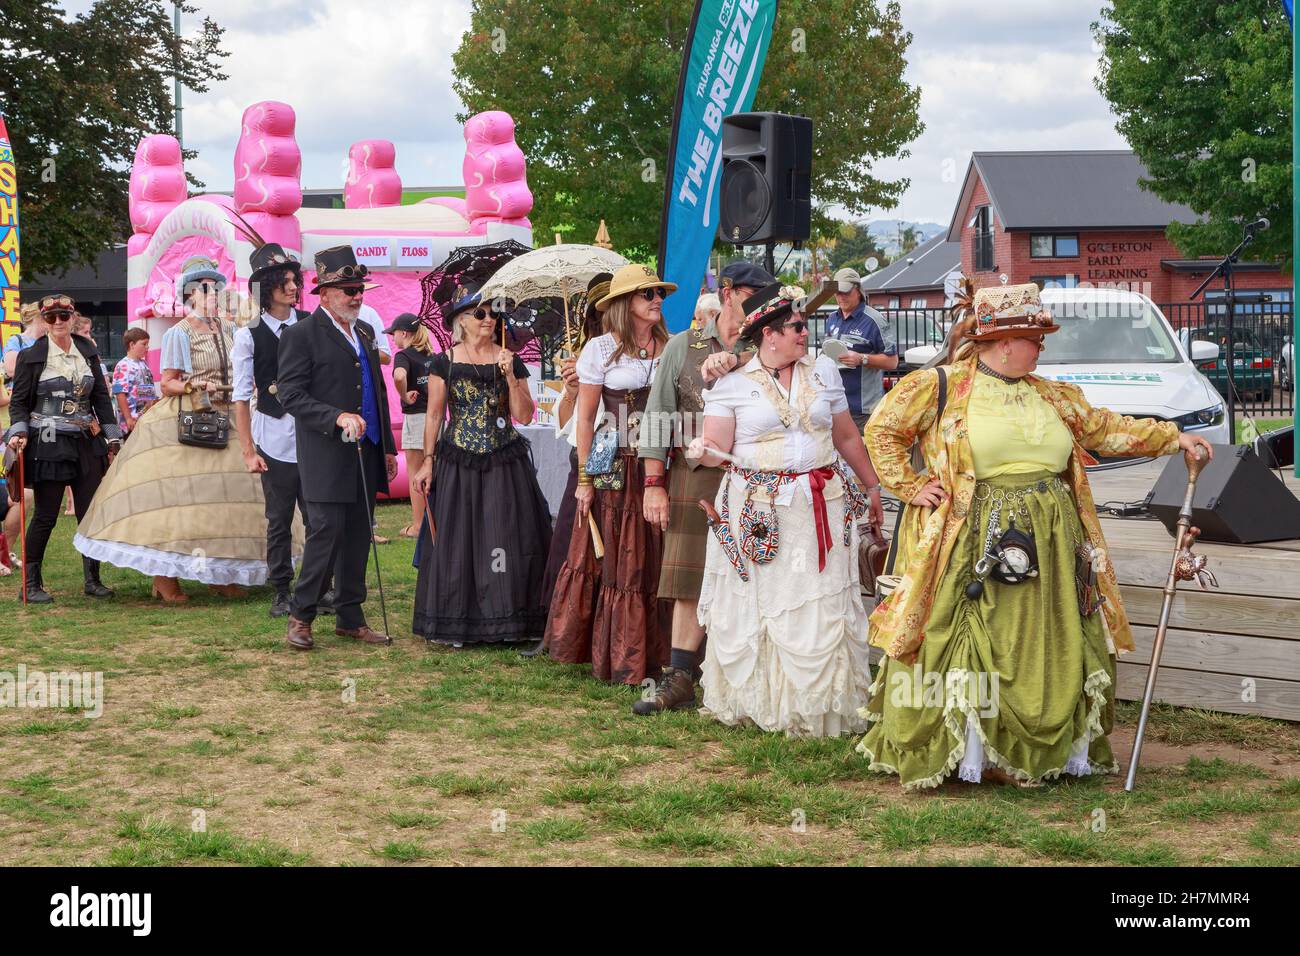 People dressed in elaborate steampunk clothing at a retro fair in Tauranga, New Zealand Stock Photo